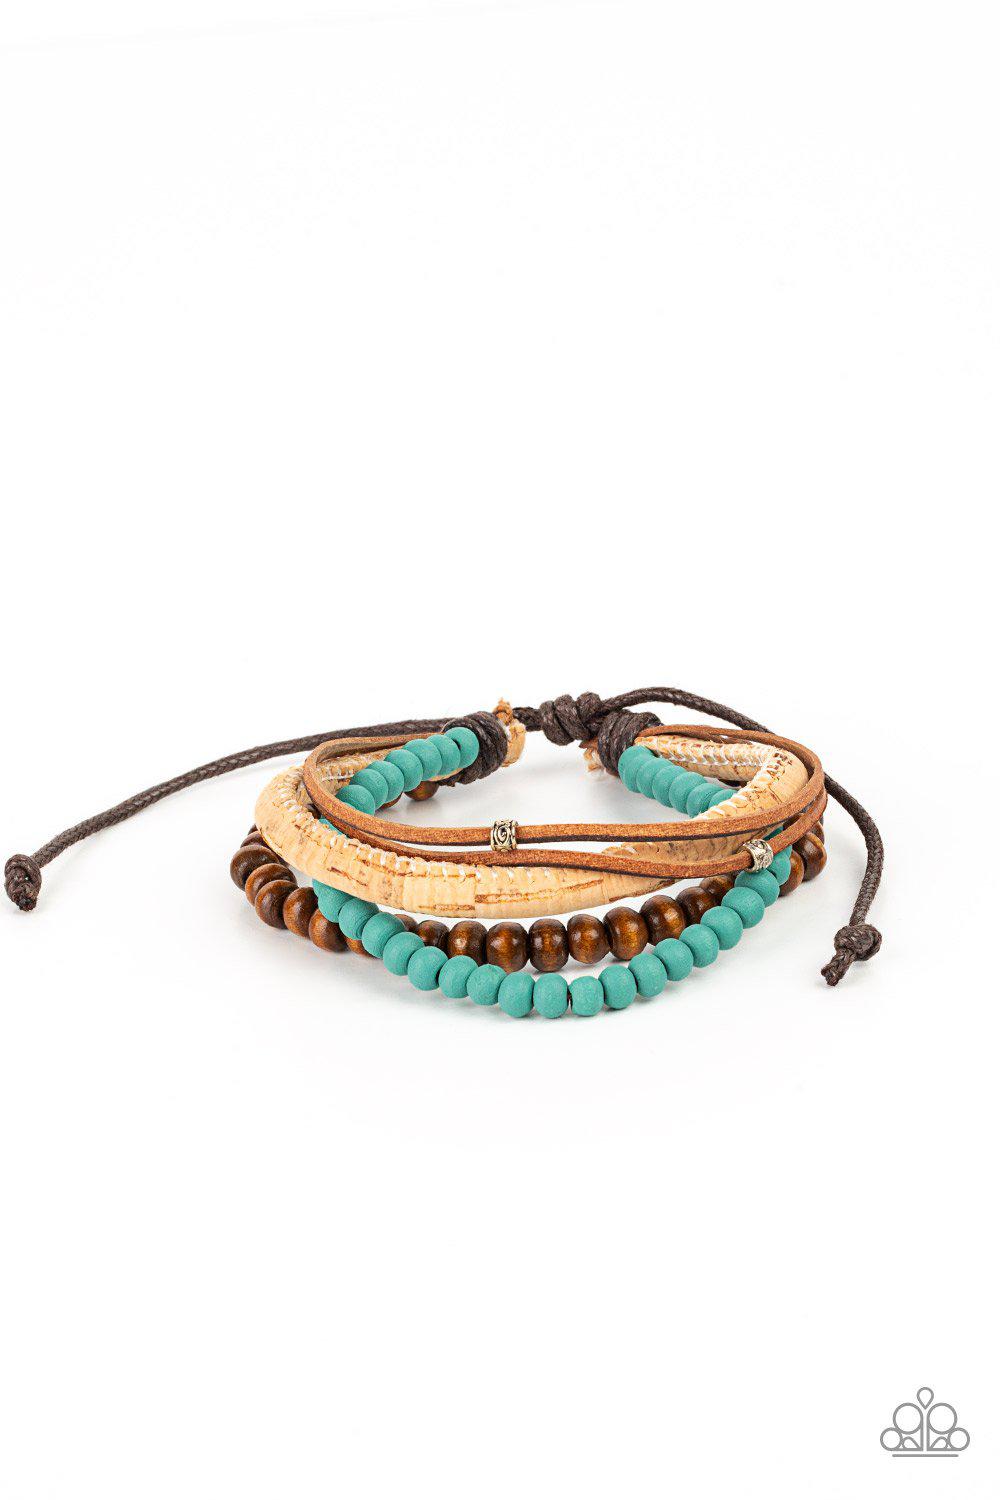 STACK To Basics Turquoise Blue Urban Knot Bracelet - Paparazzi Accessories- lightbox - CarasShop.com - $5 Jewelry by Cara Jewels